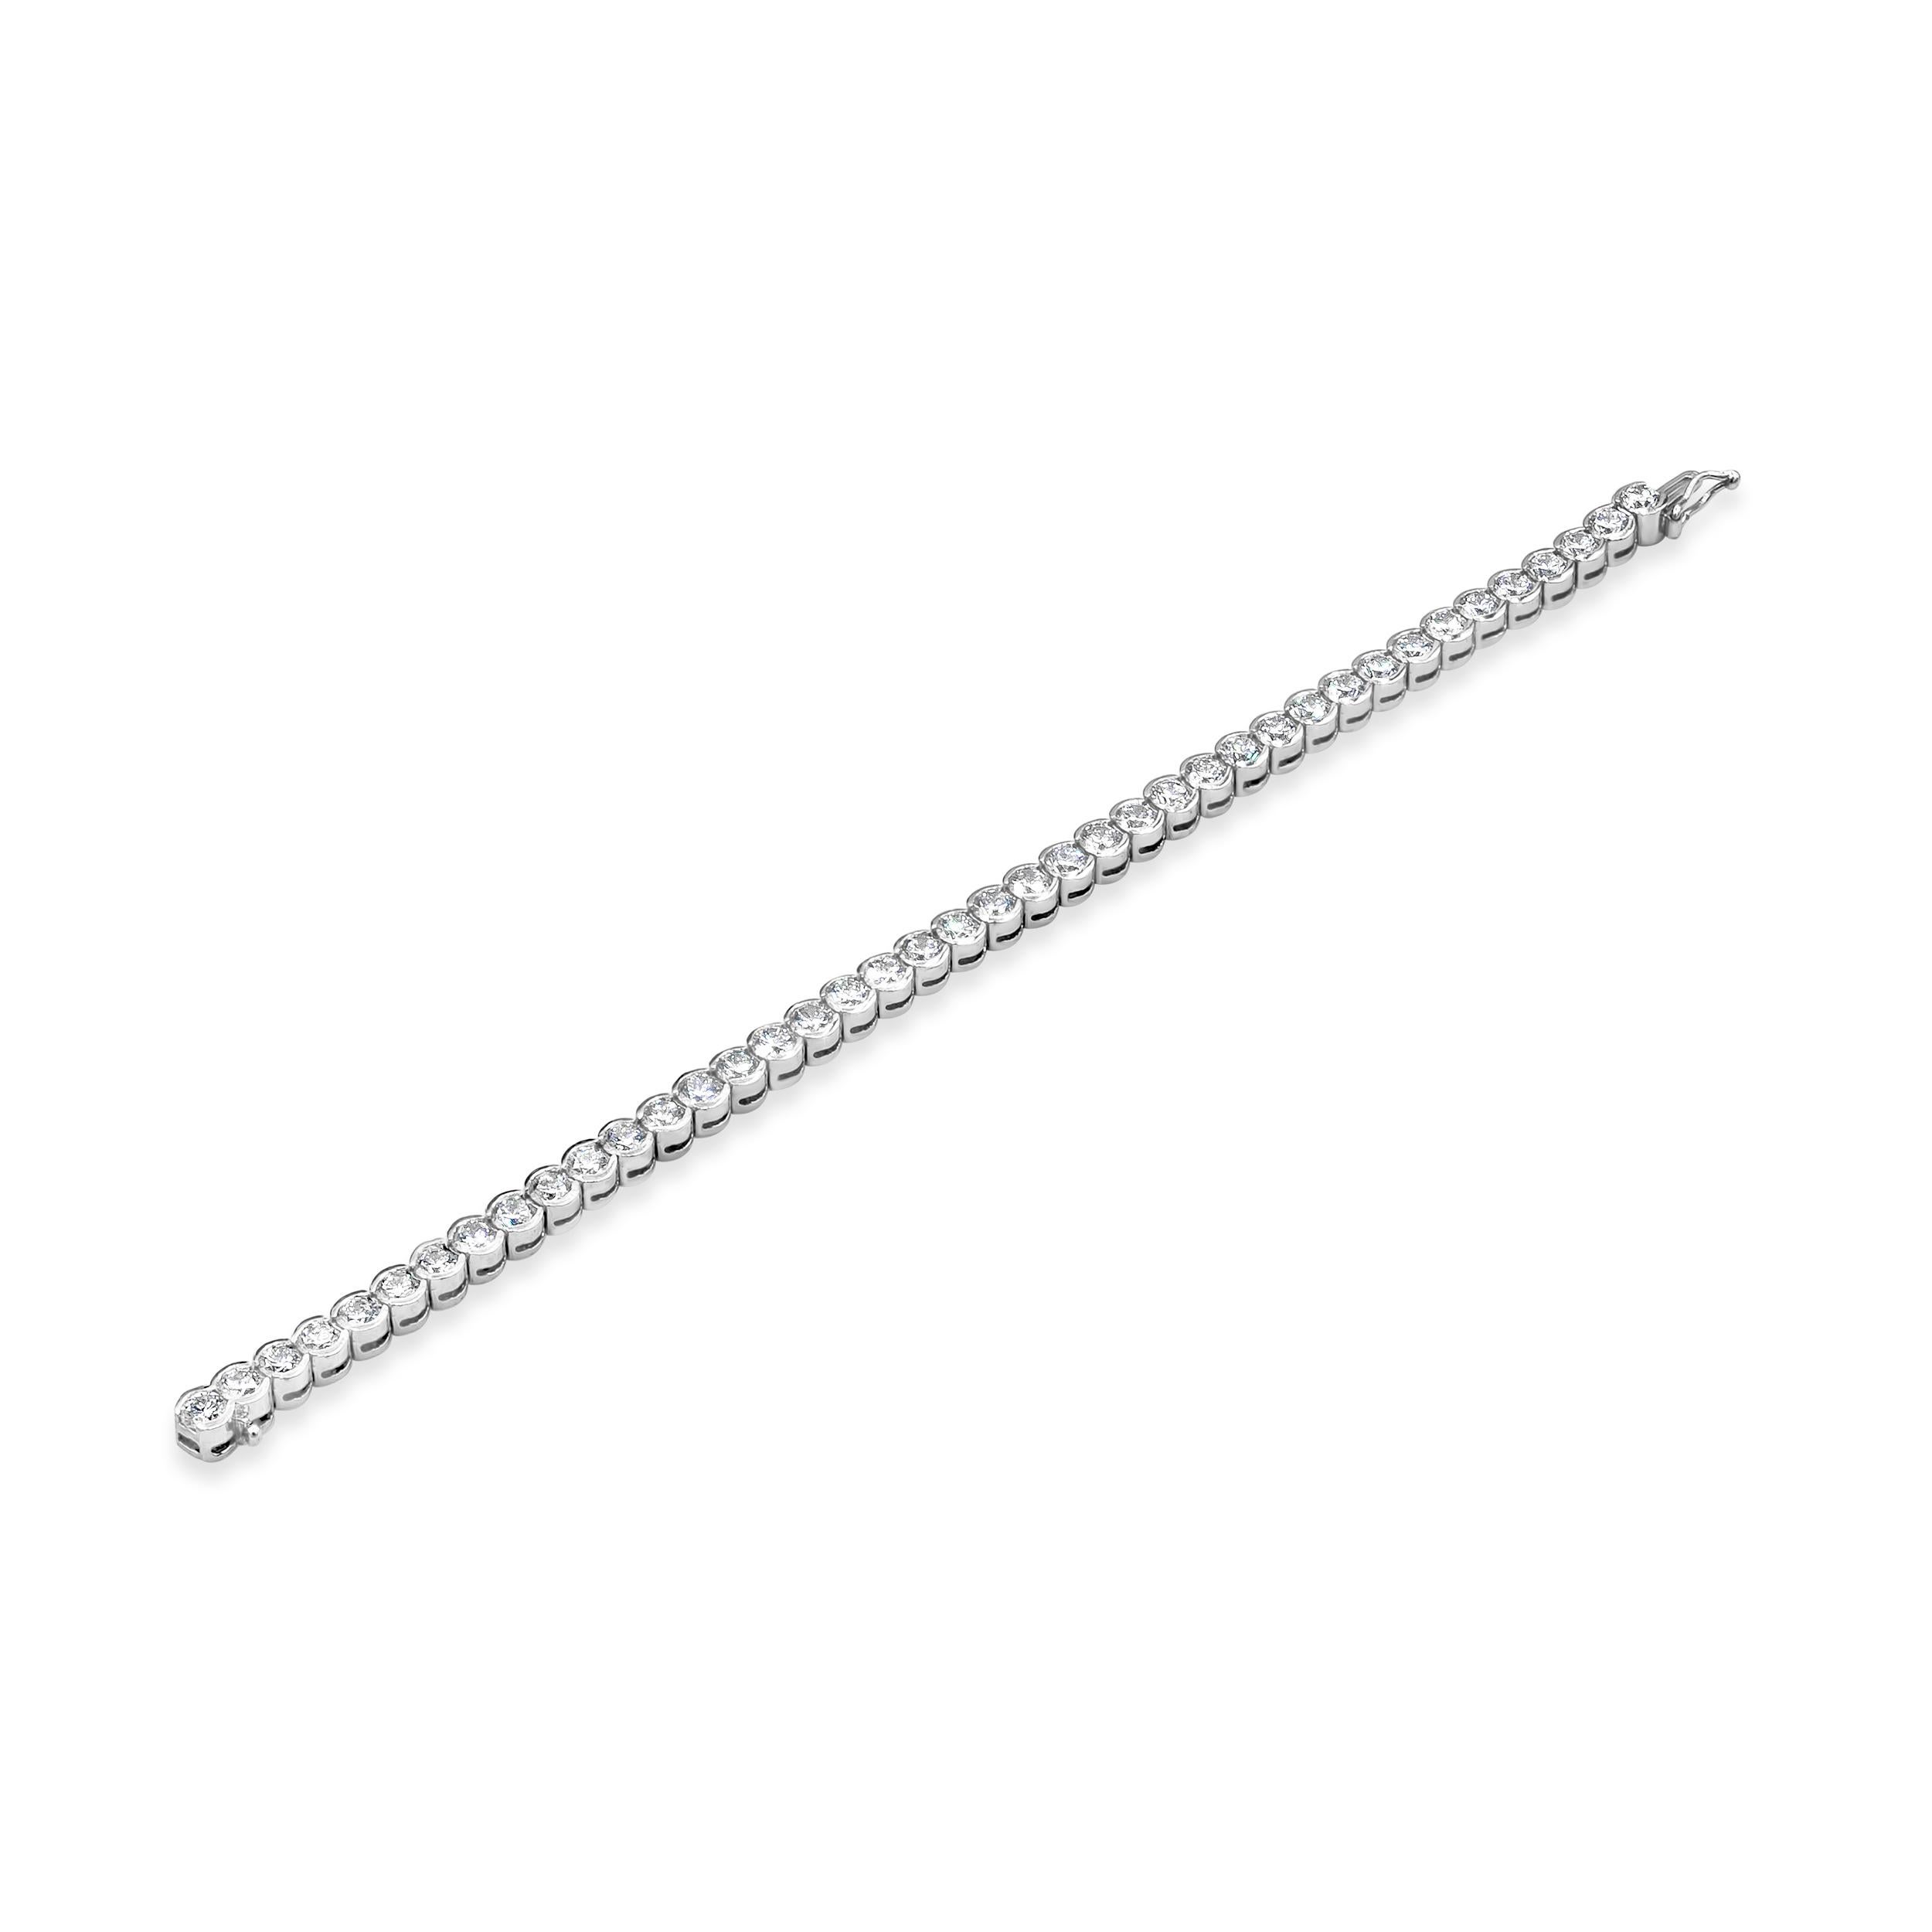 A brilliant tennis bracelet showcasing a row of round brilliant diamonds. Diamonds weigh 10.10 carats total set in a half-bezel mounting. Made with Platinum. 7 inches in Length. 

E-F COLOR
VS CLARITY

Style available in different price ranges.